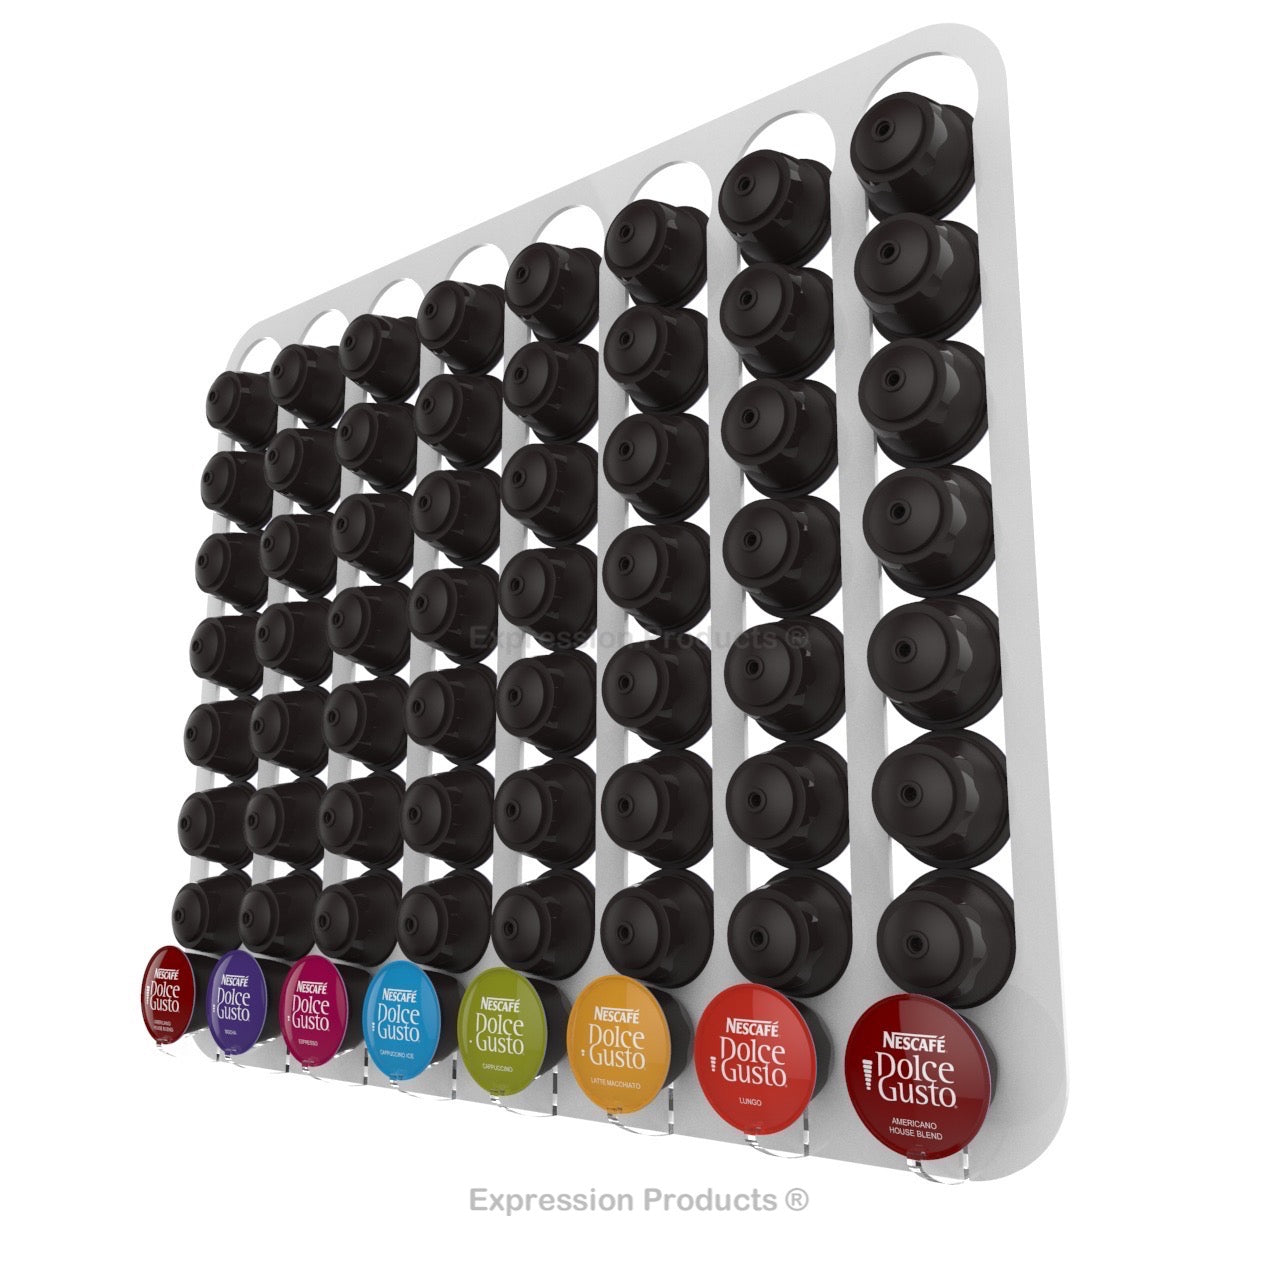 Dolce Gusto Coffee Pod Holder, Wall Mounted.  Shown in White Holding 64 Pods